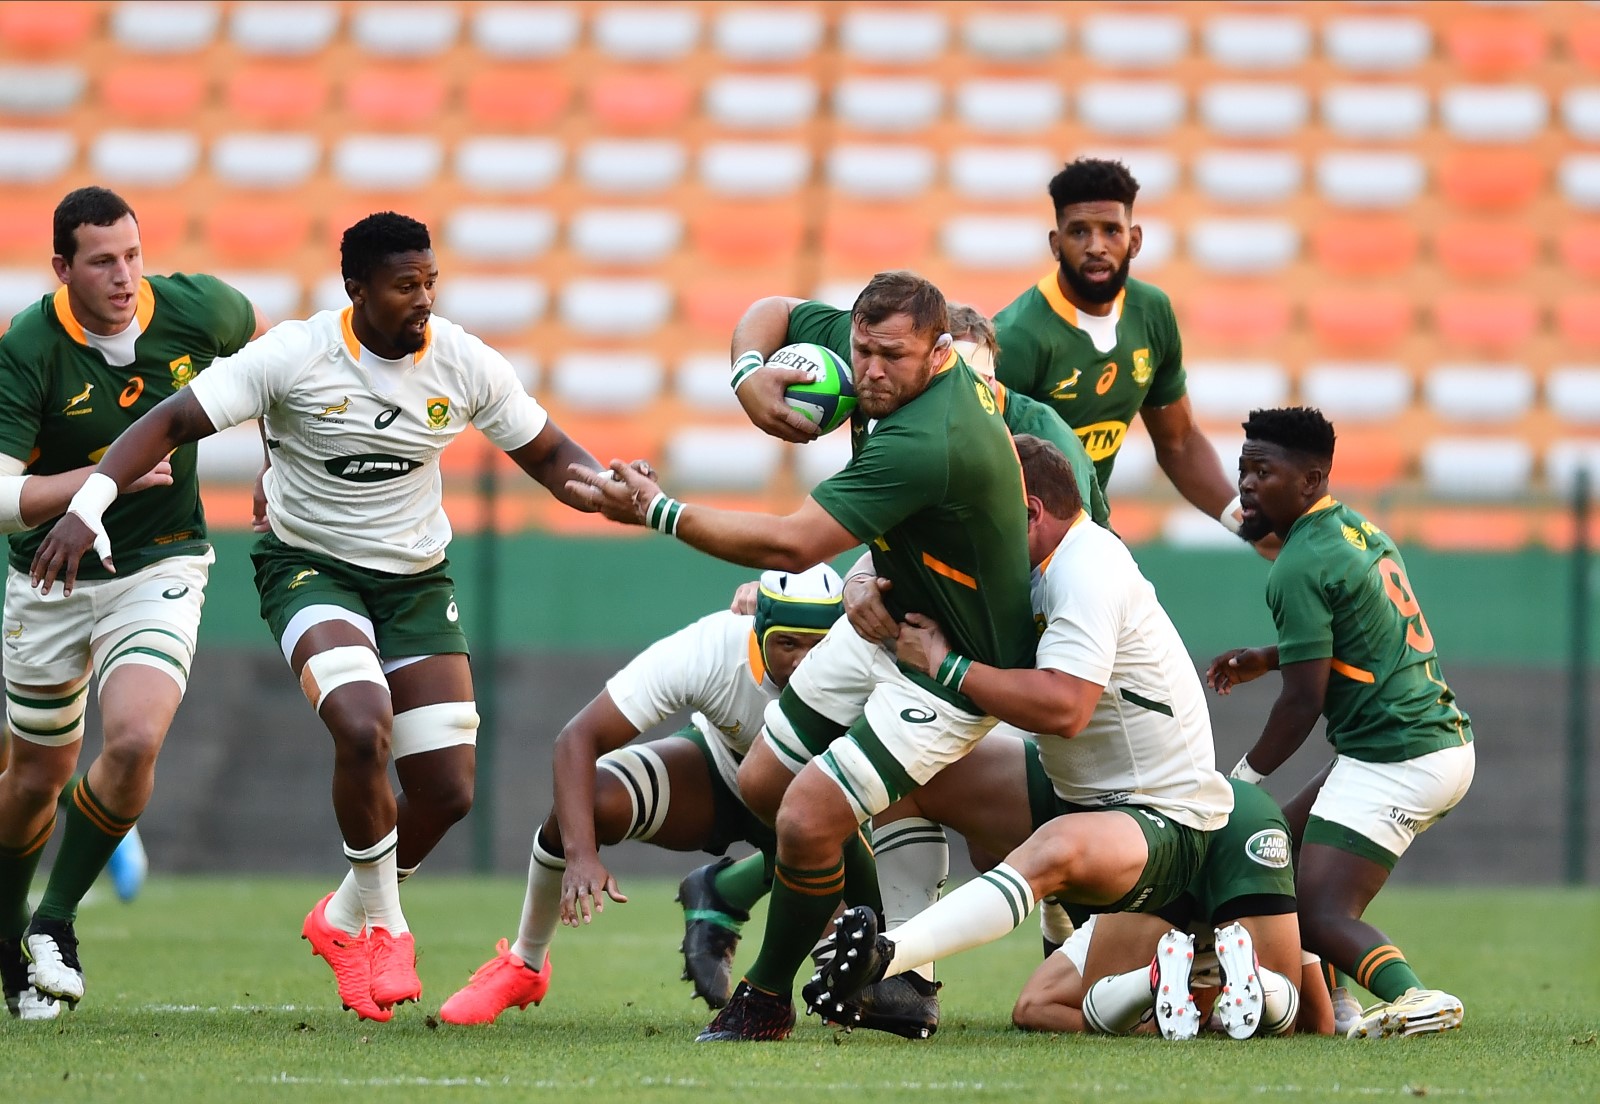 Duane Vermeulen on the charge for the Greens.